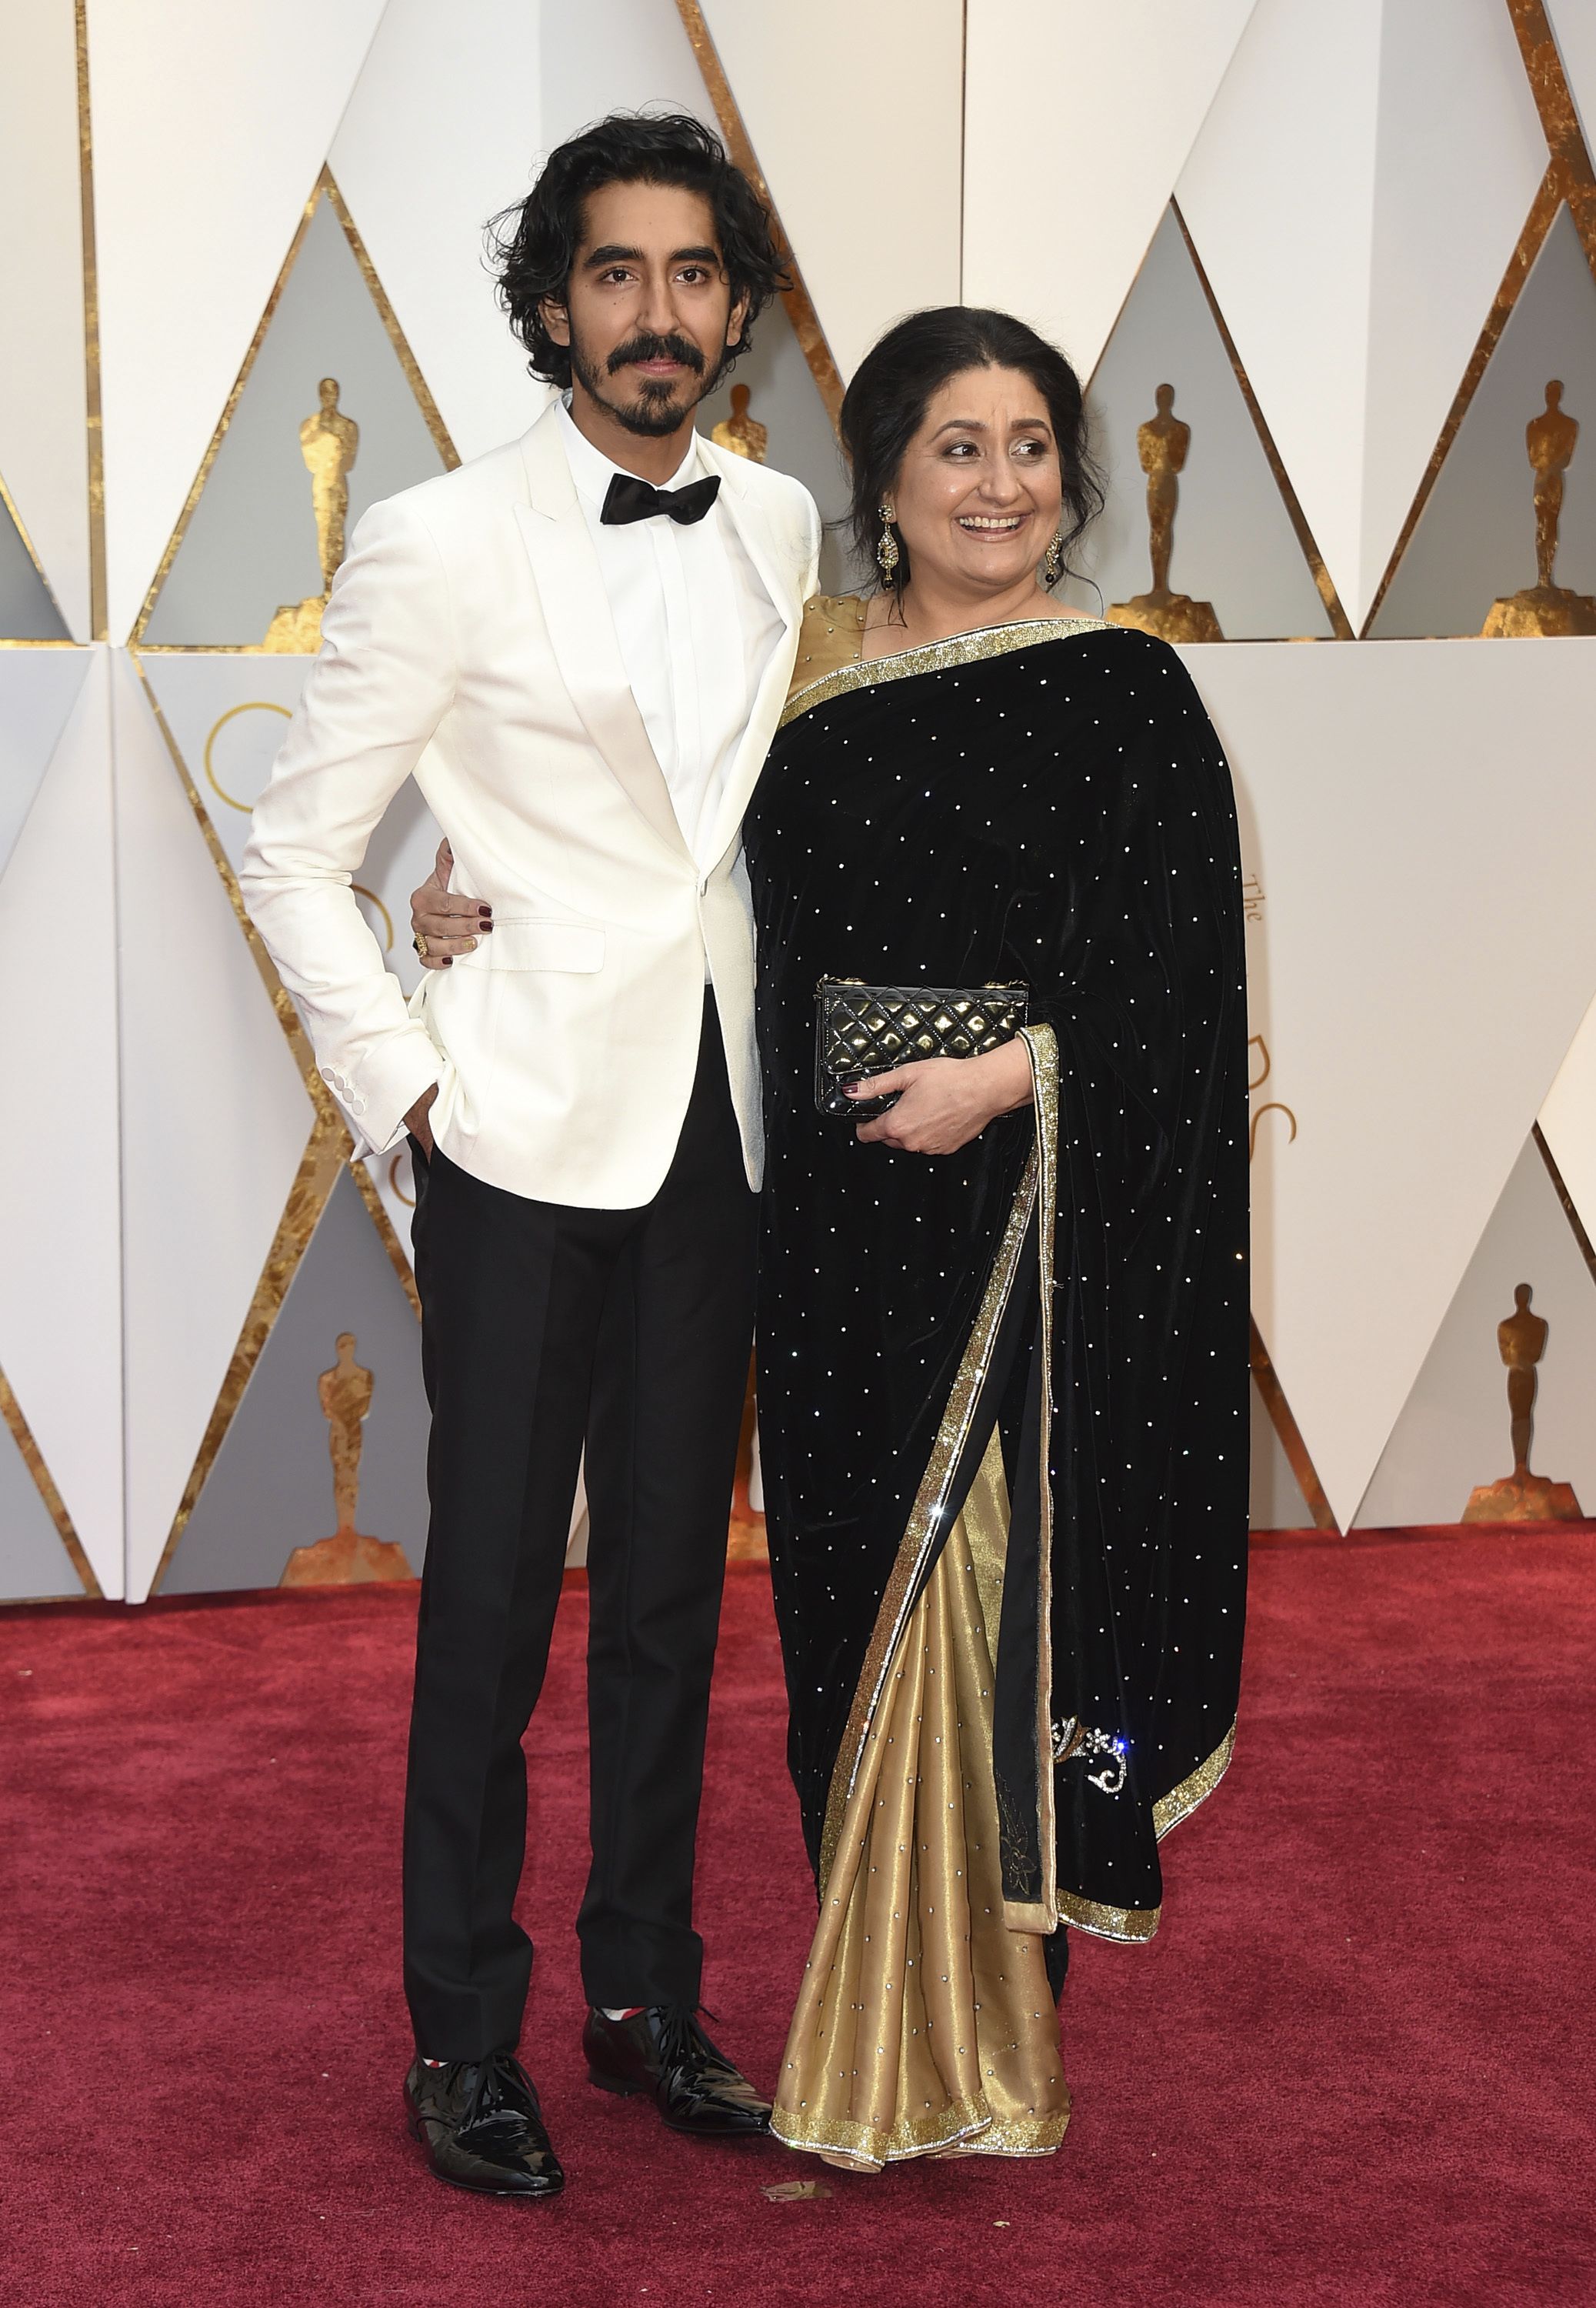 Dev Patel, left, and Anita Patel arrive at the Oscars on Sunday, Feb. 26, 2017, at the Dolby Theatre in Los Angeles. (Photo by Jordan Strauss/Invision/AP)